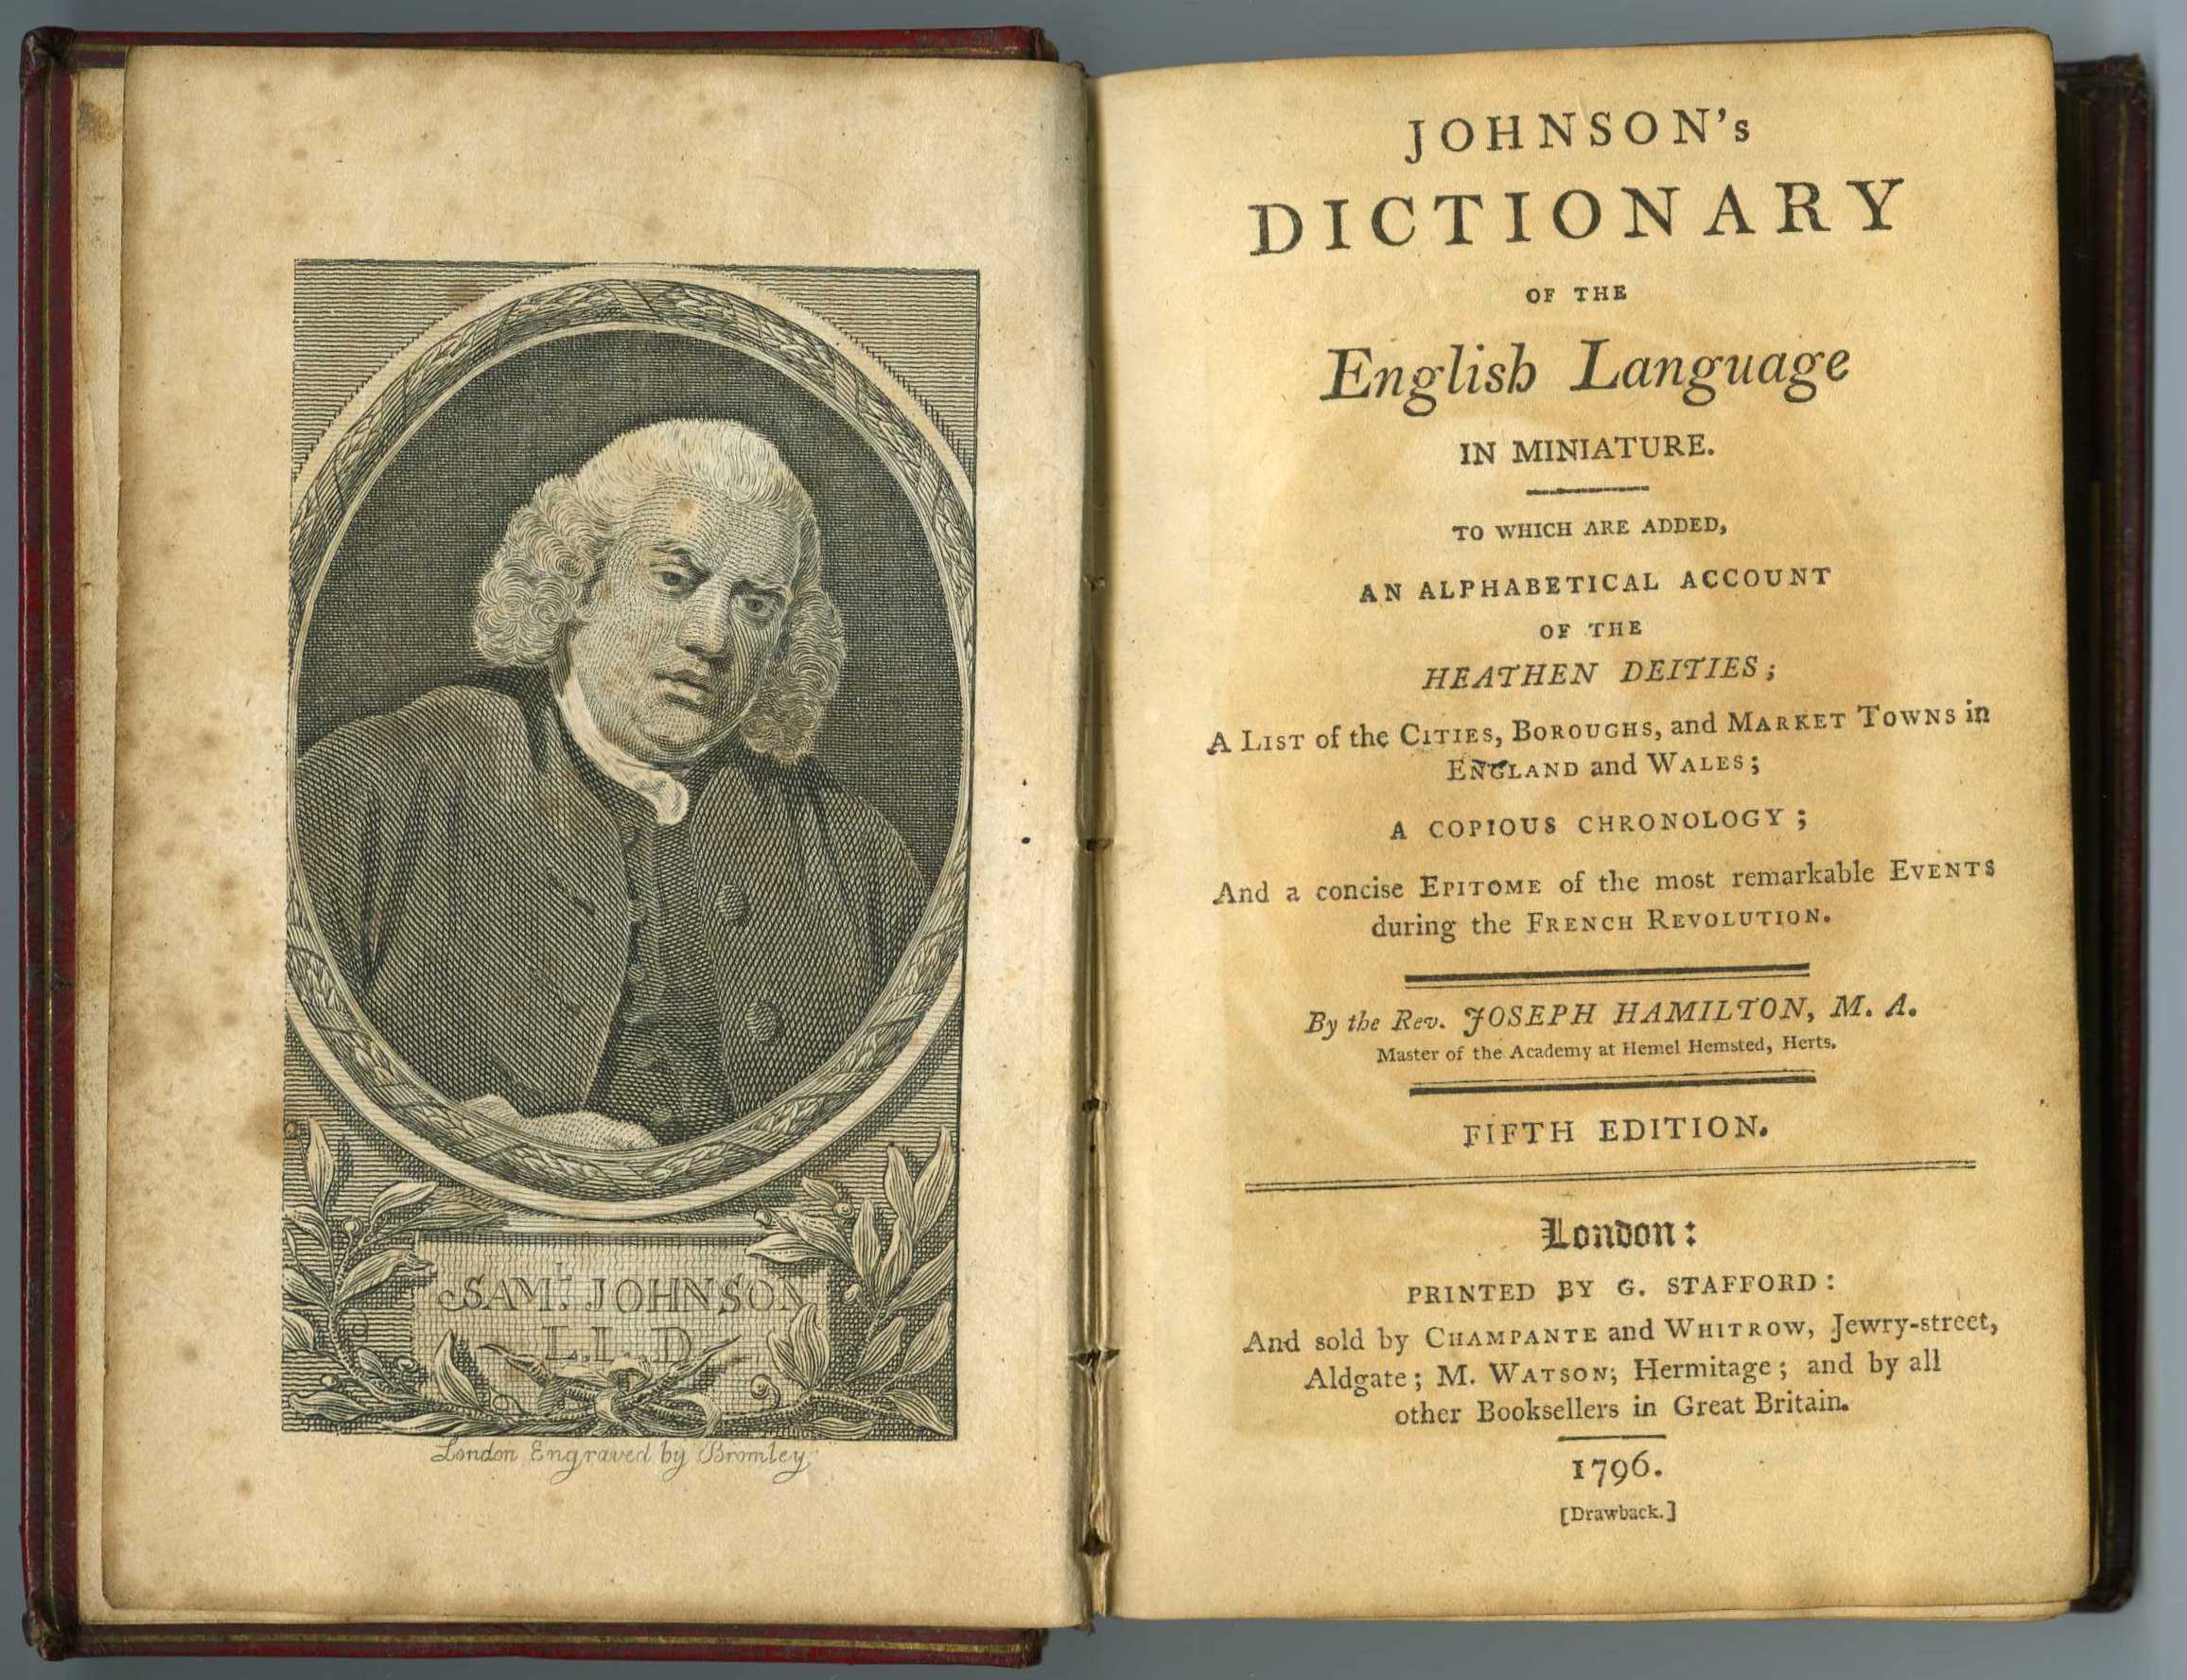 A Dictionary of the English Language, Shakespeare Institute Library